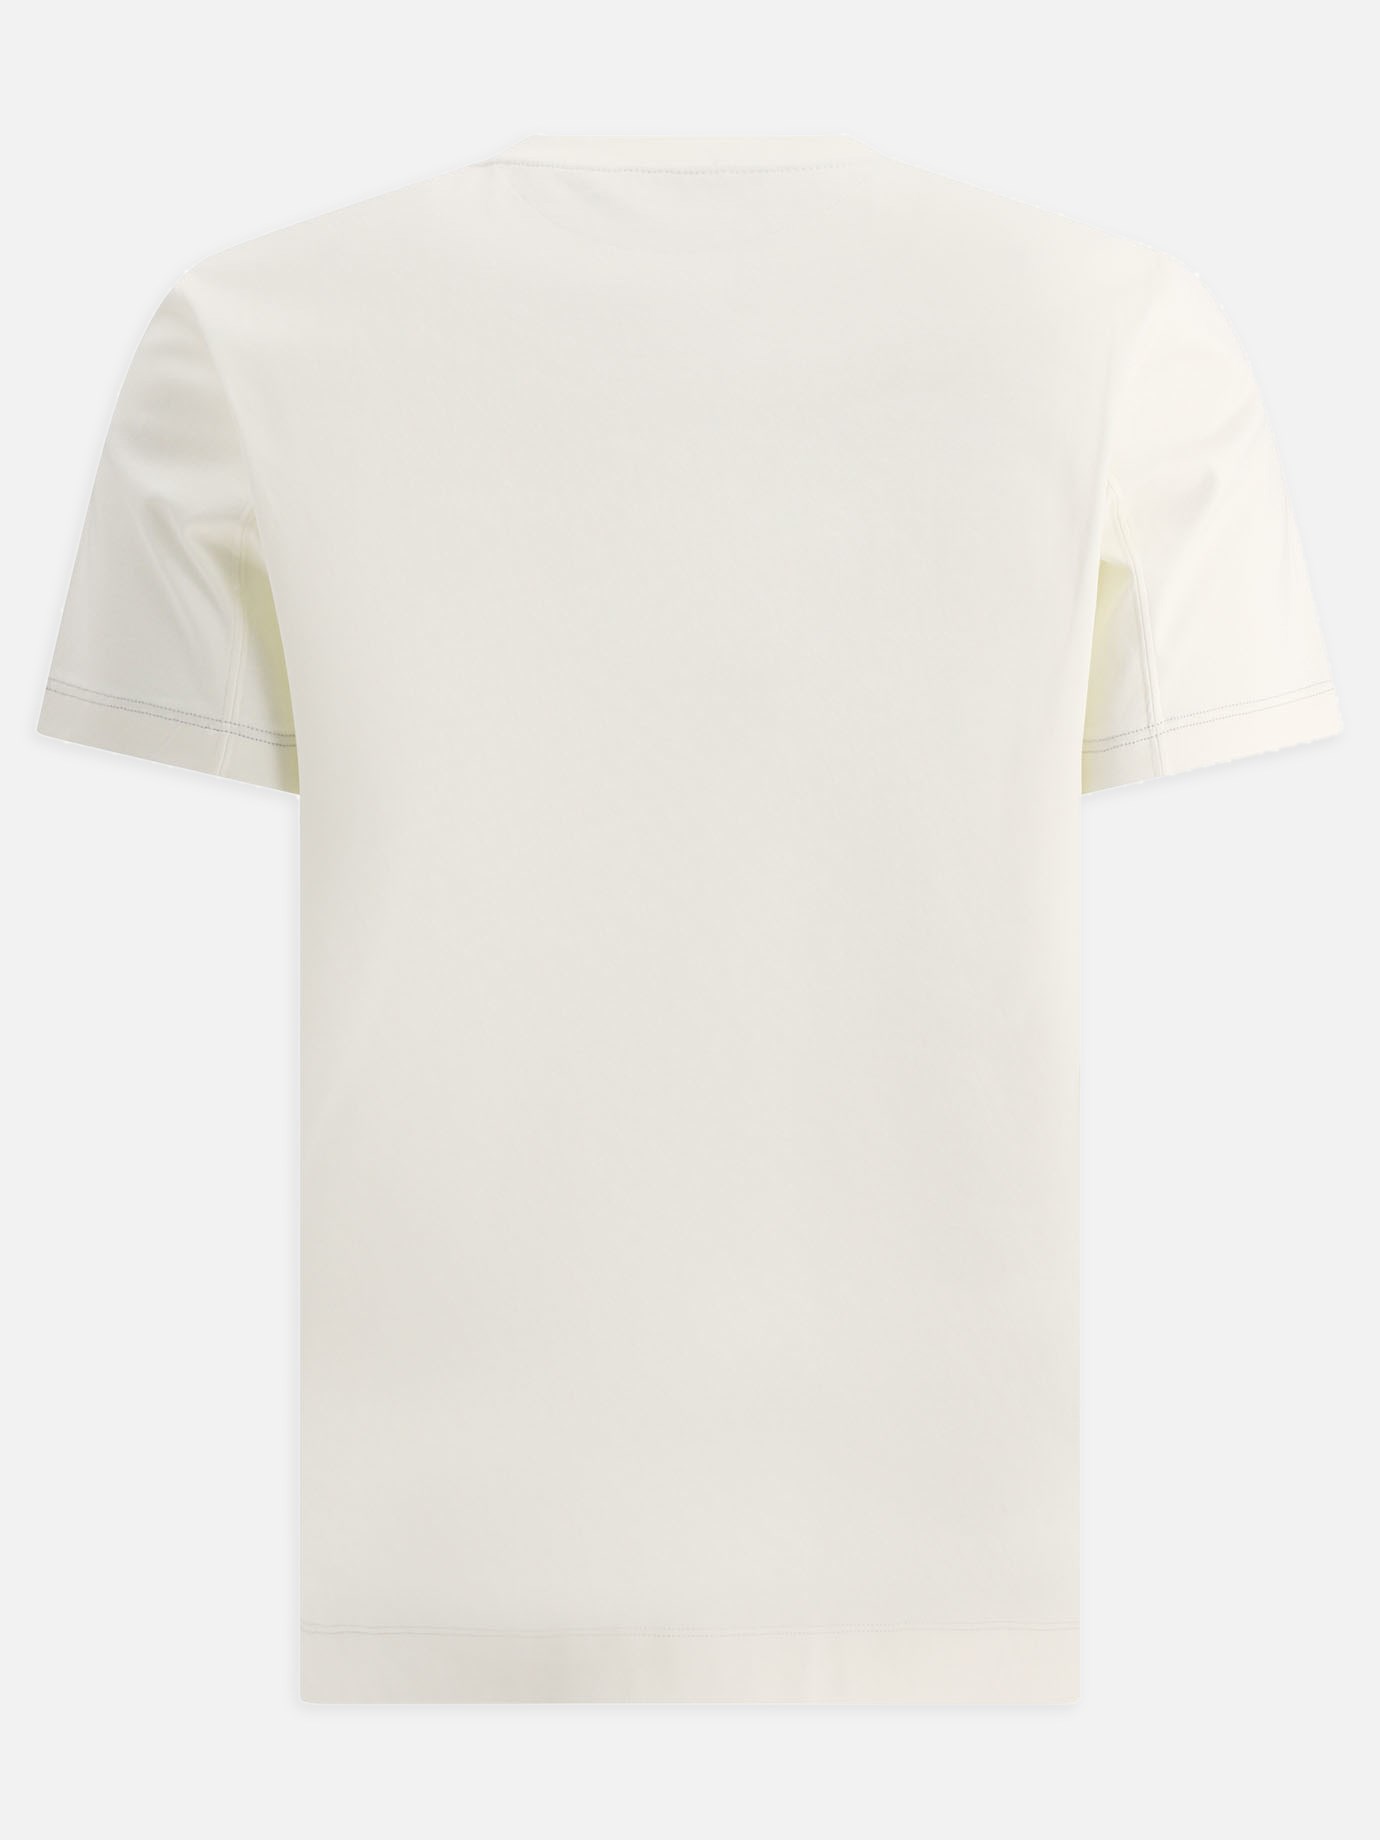  Simplicity in Elegance  t-shirt by Brunello Cucinelli